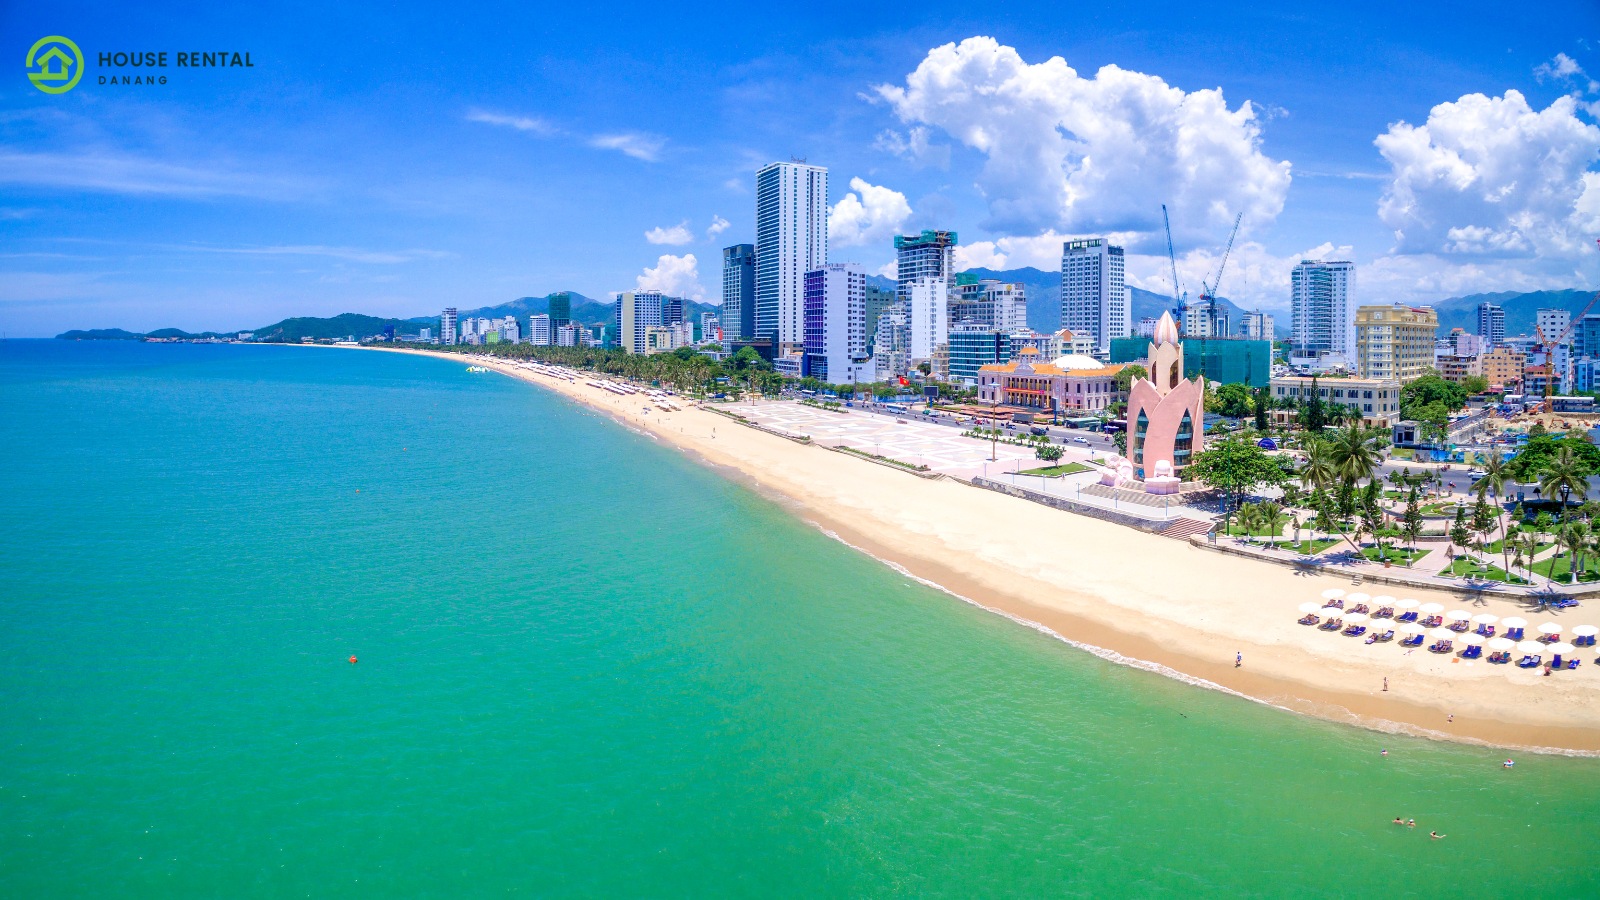 How Far is Nha Trang from Danang - Best Ways by Train, Bus, or Flight